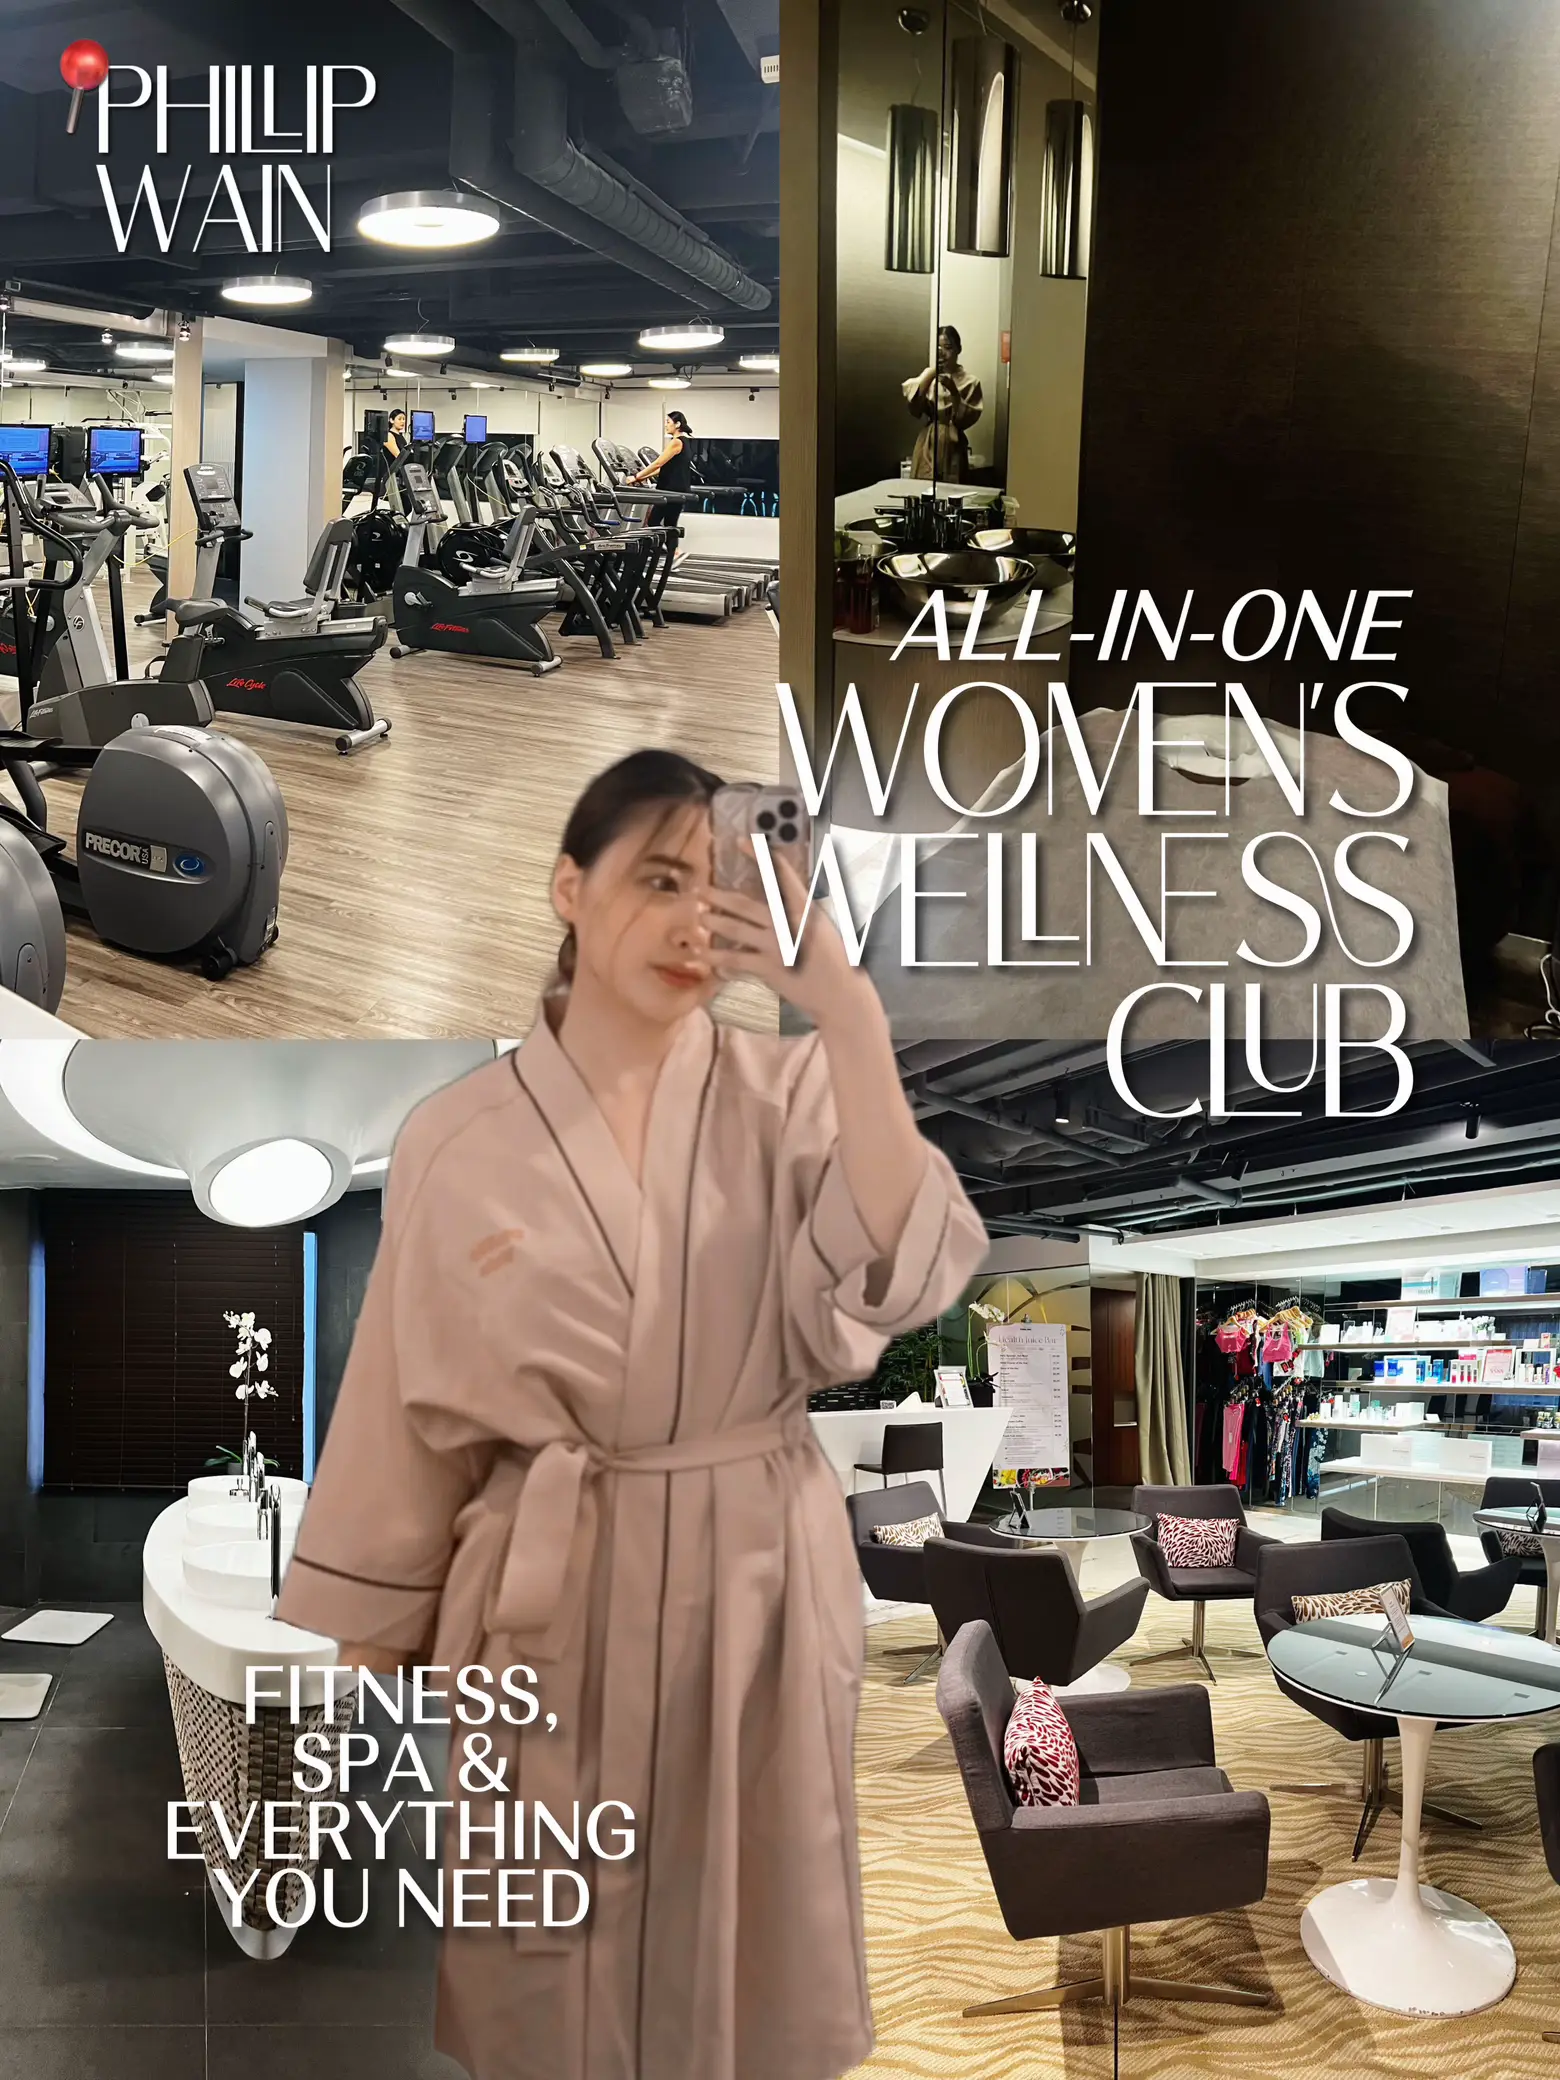 Women-only fitness & spa club, all under one roof!'s images(0)